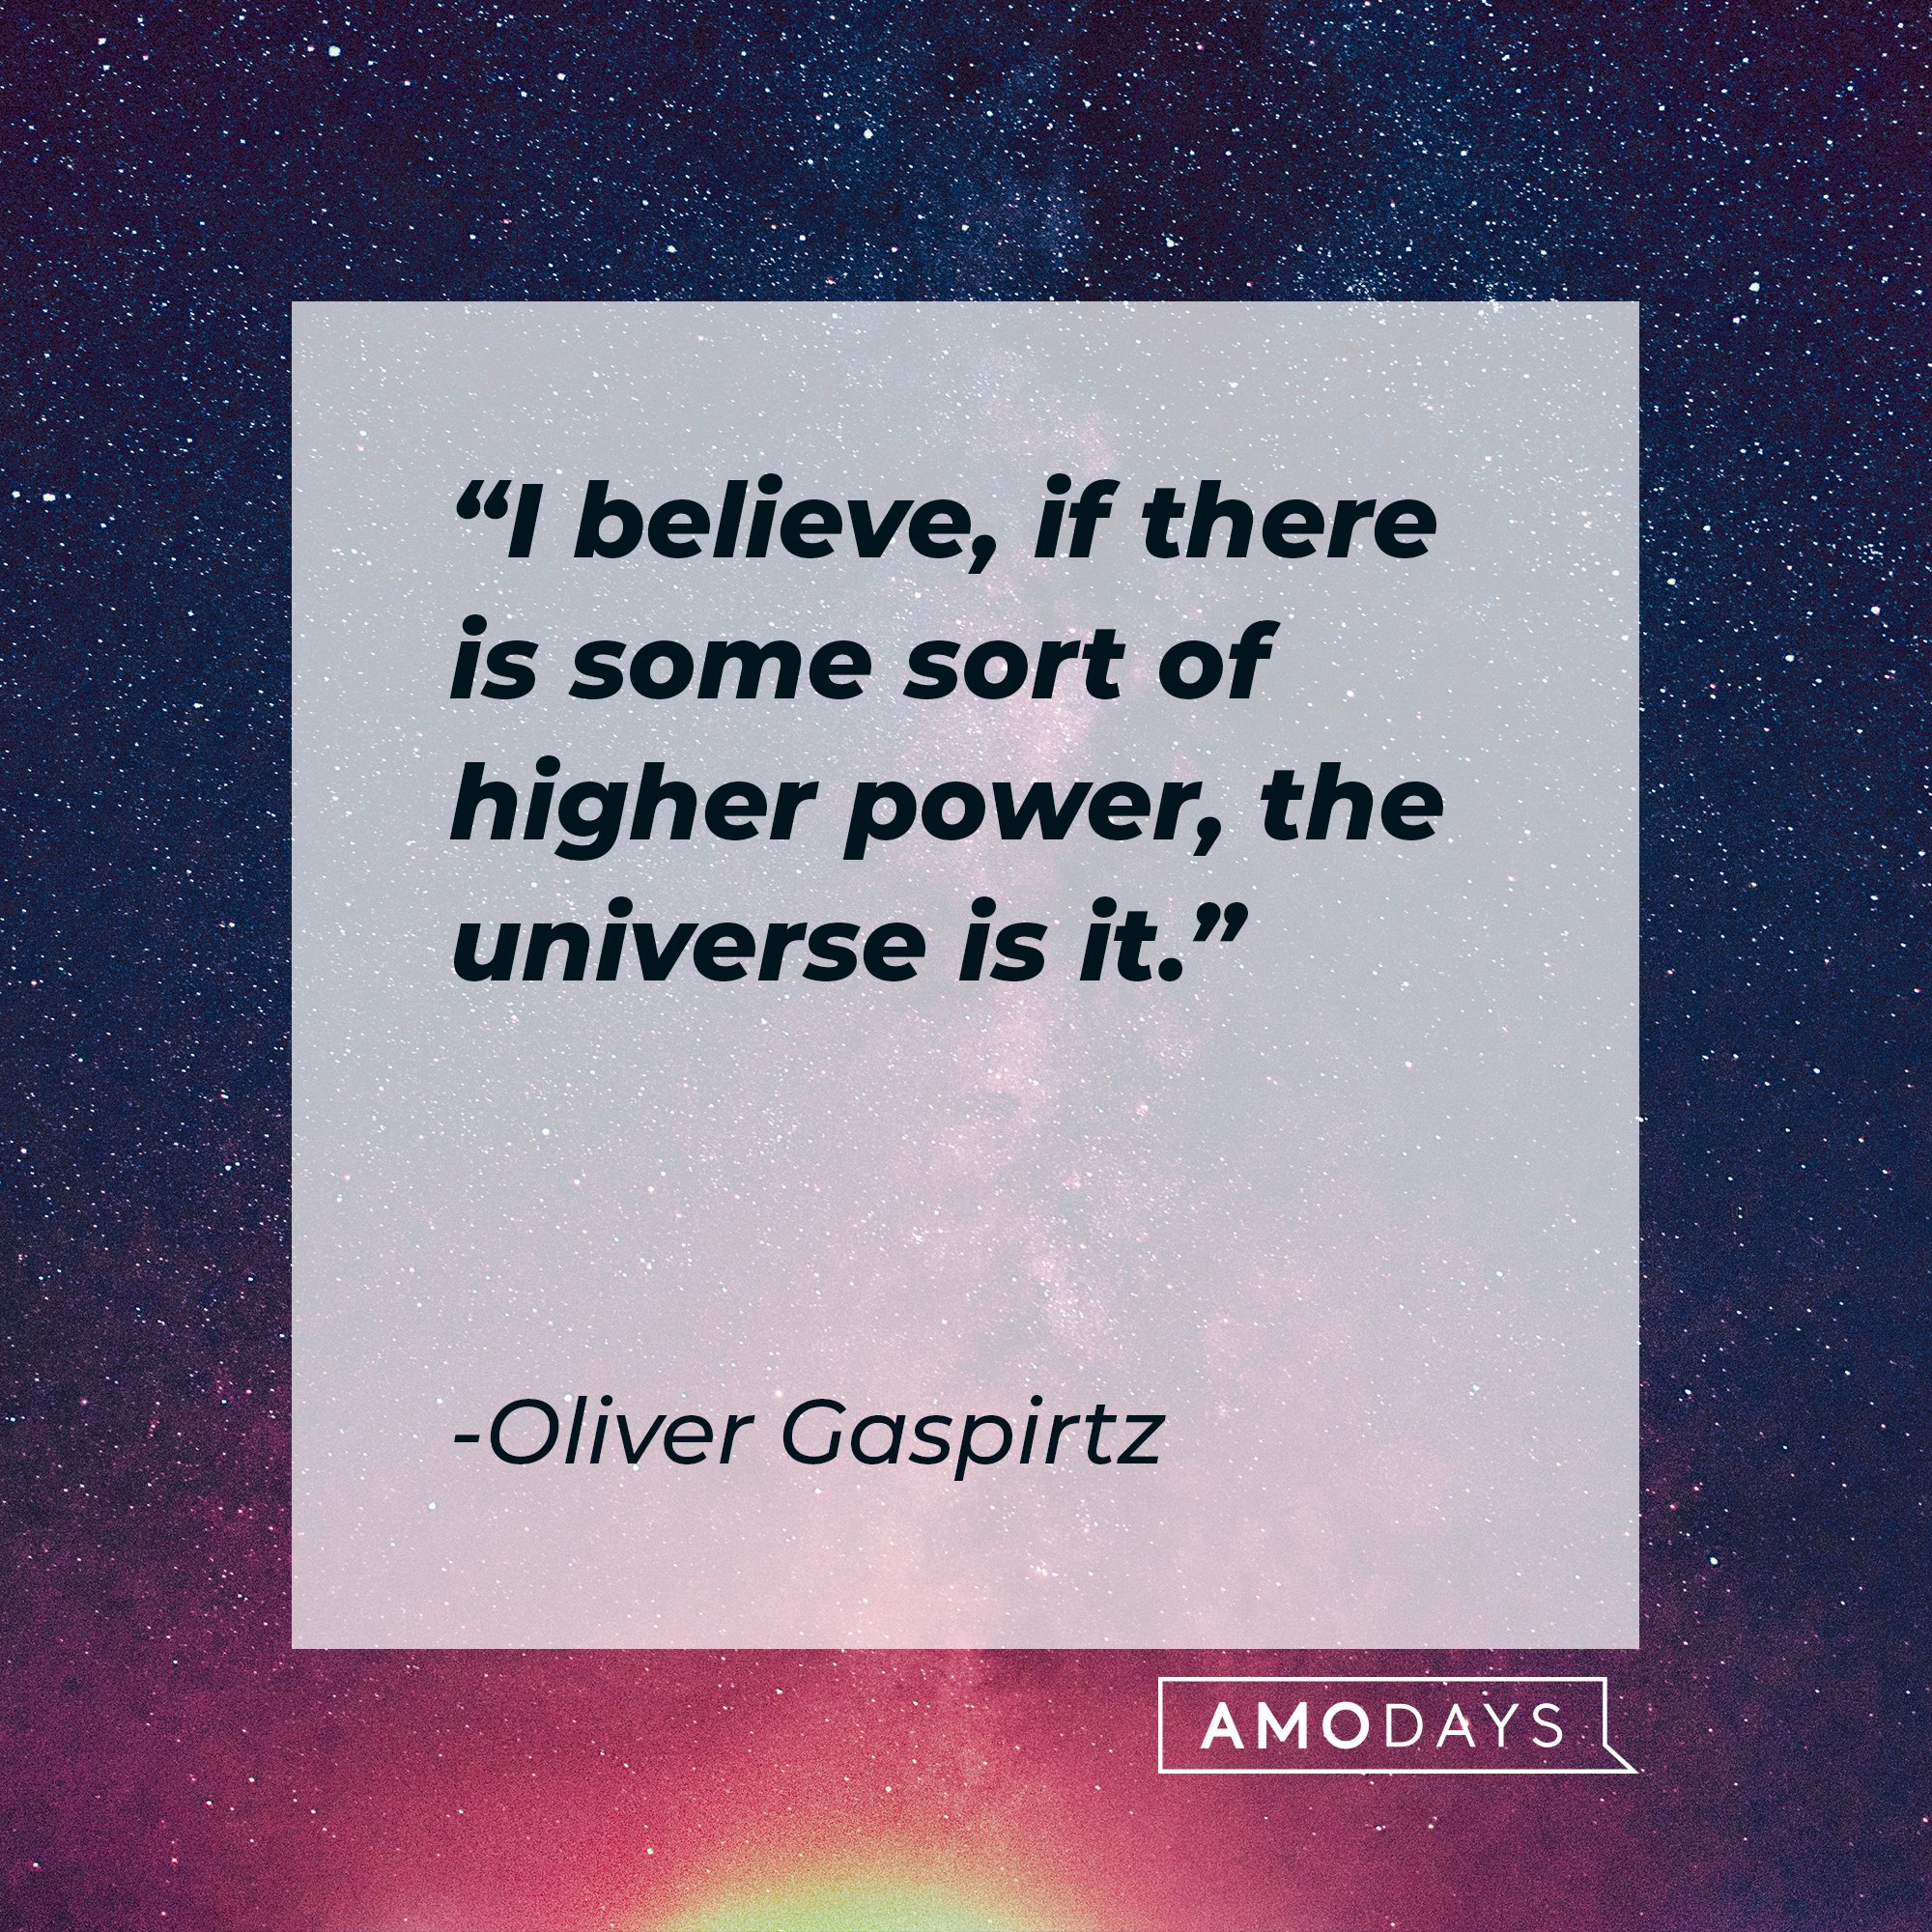 Oliver Gaspirtz’s quote: "If I believe, if there is some sort of higher power, the universe is it." | Image: AmoDays